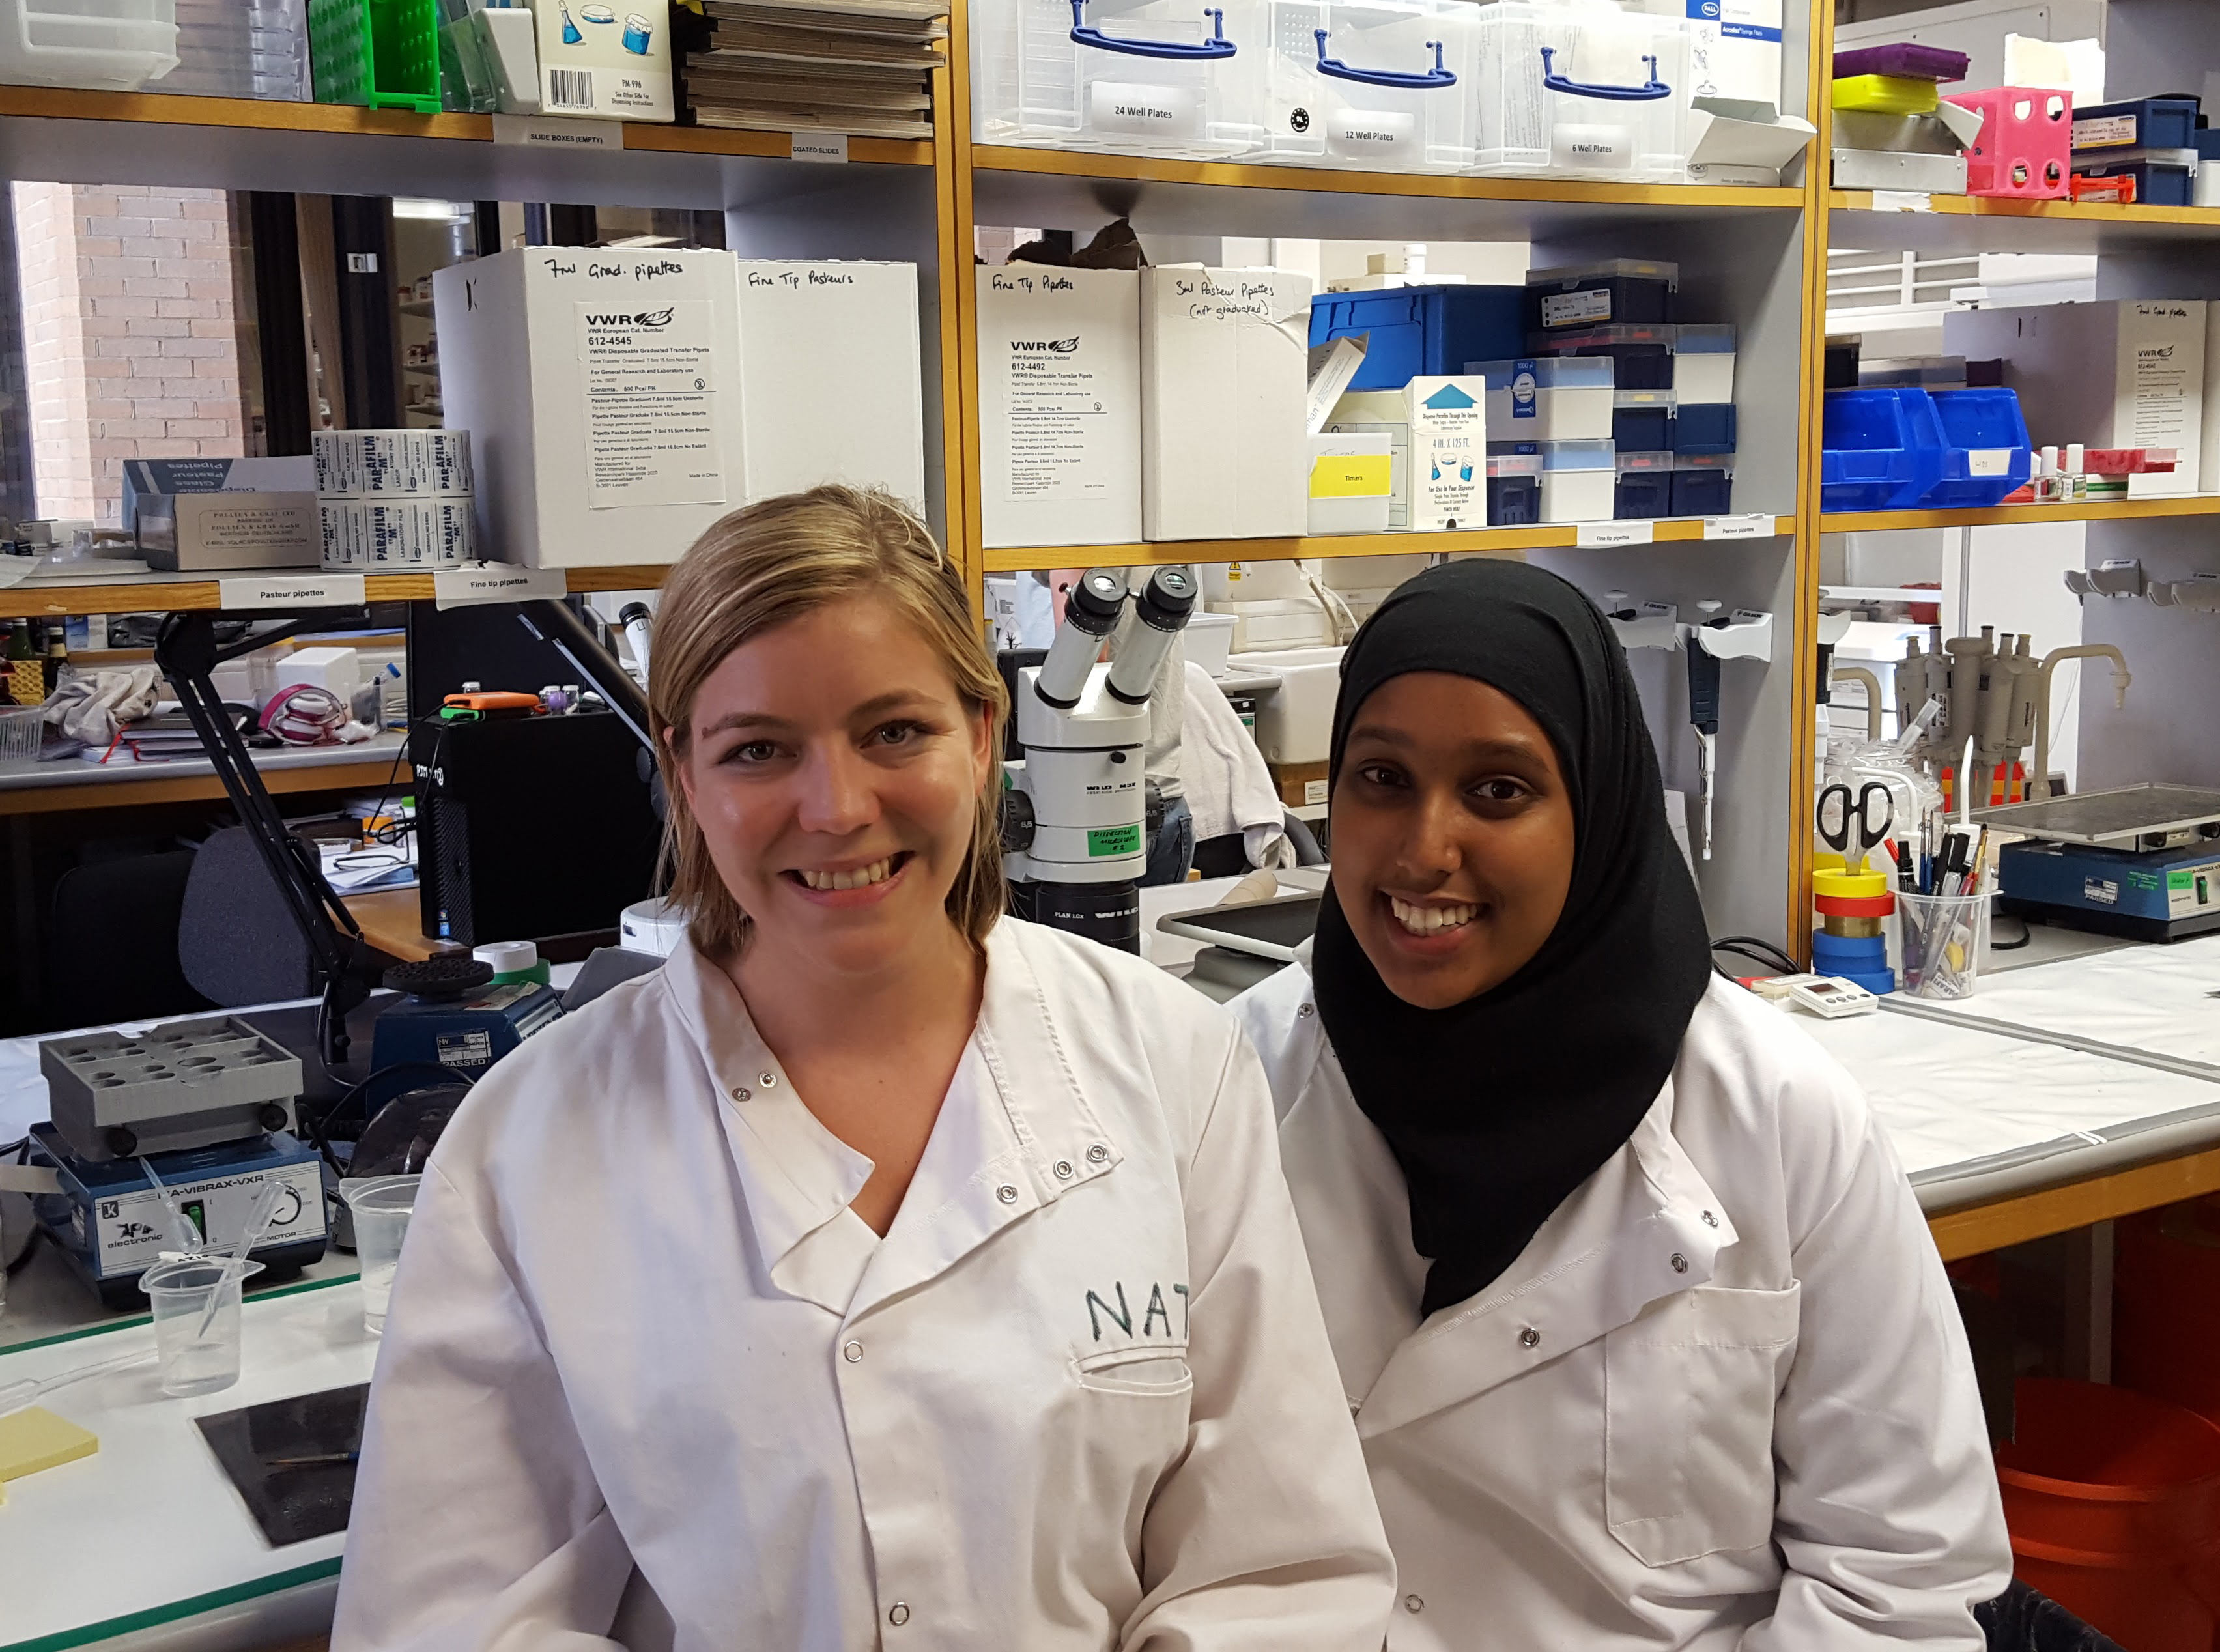 In2scienceUK placement student Hazera, with her mentor, Unit scientist Dr Natalie Doig.